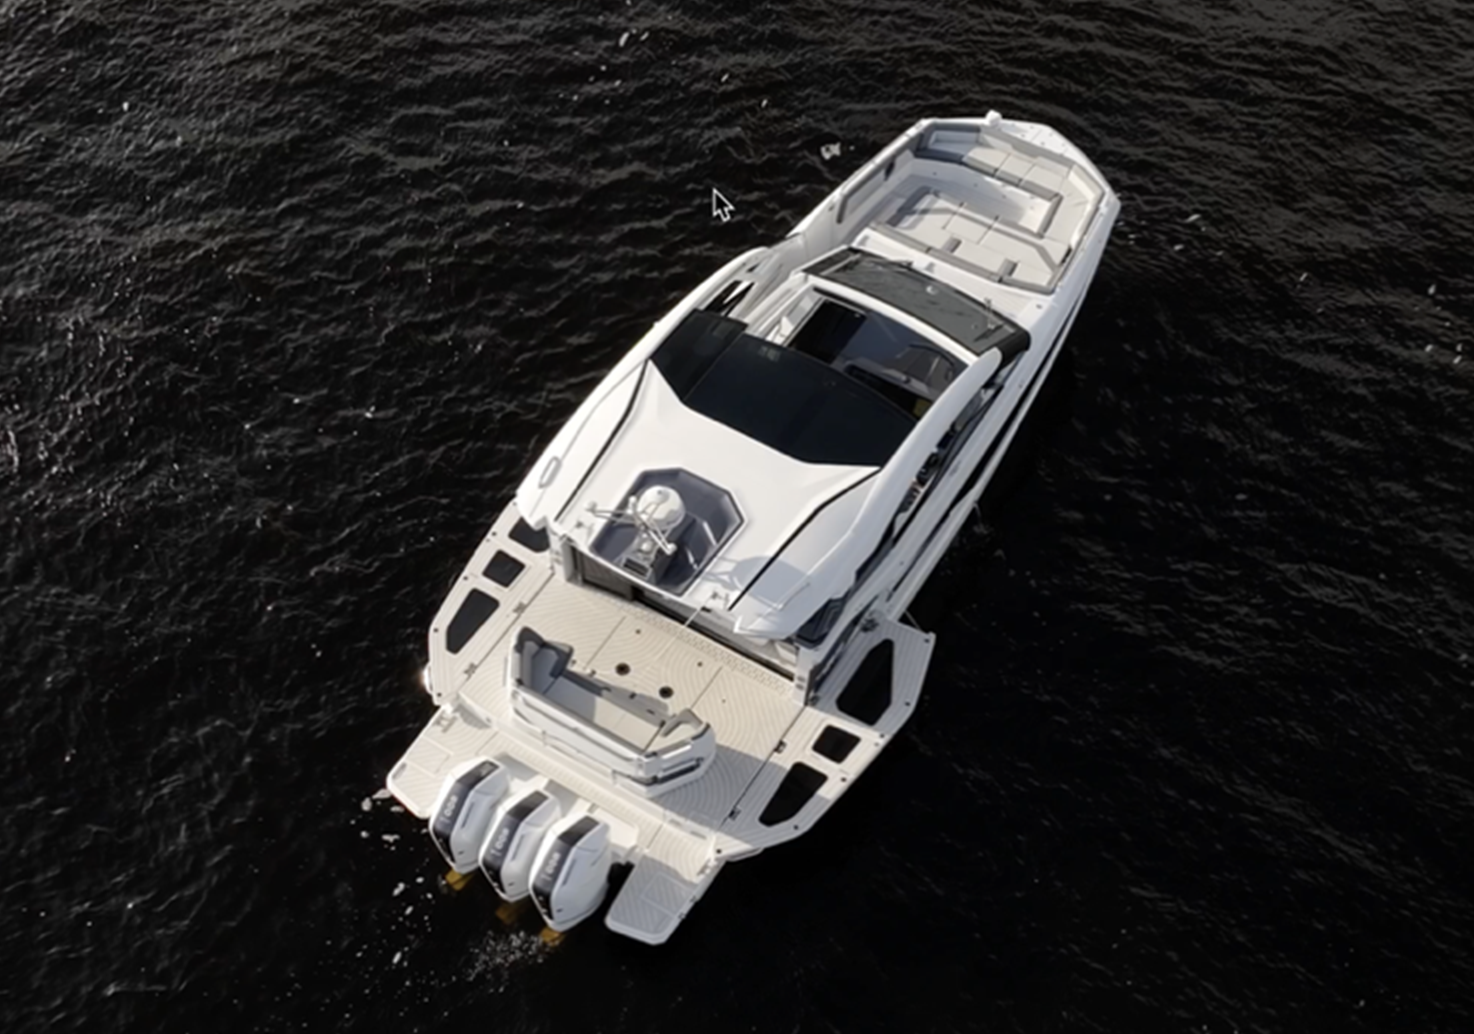 Galeon 435 GTO Overhead view with both balconies extended